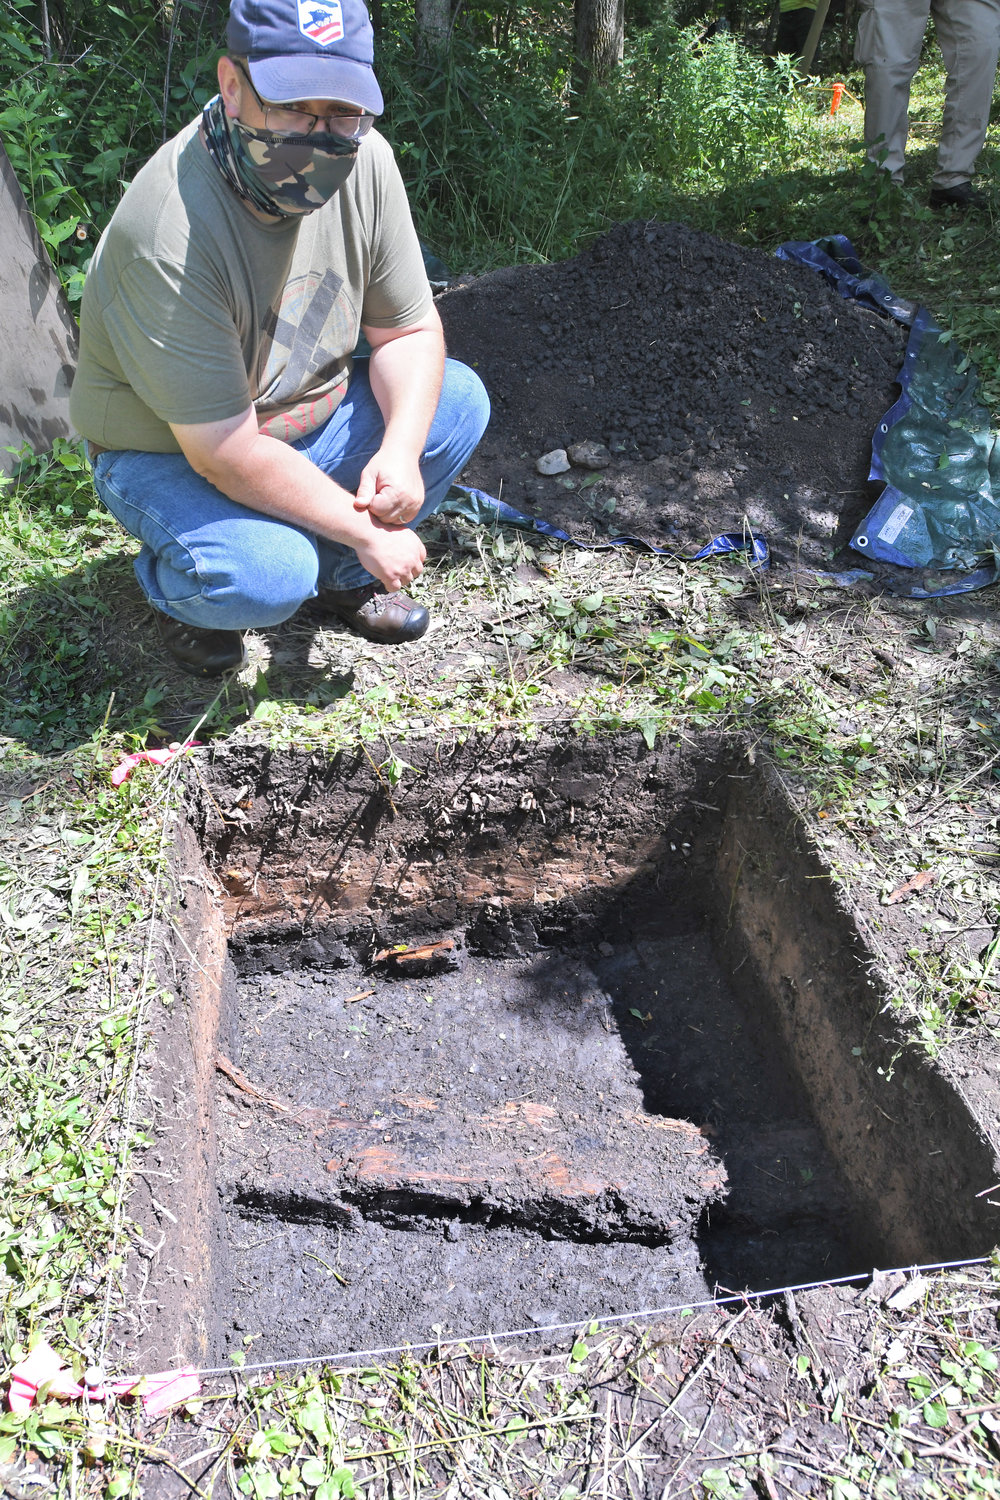 Brian Grills director of the Public Archaeology Facility at Binghamton Universtiy kneels next to a timber that was revealed during the dig. They found a smushed musket ball in the timber.